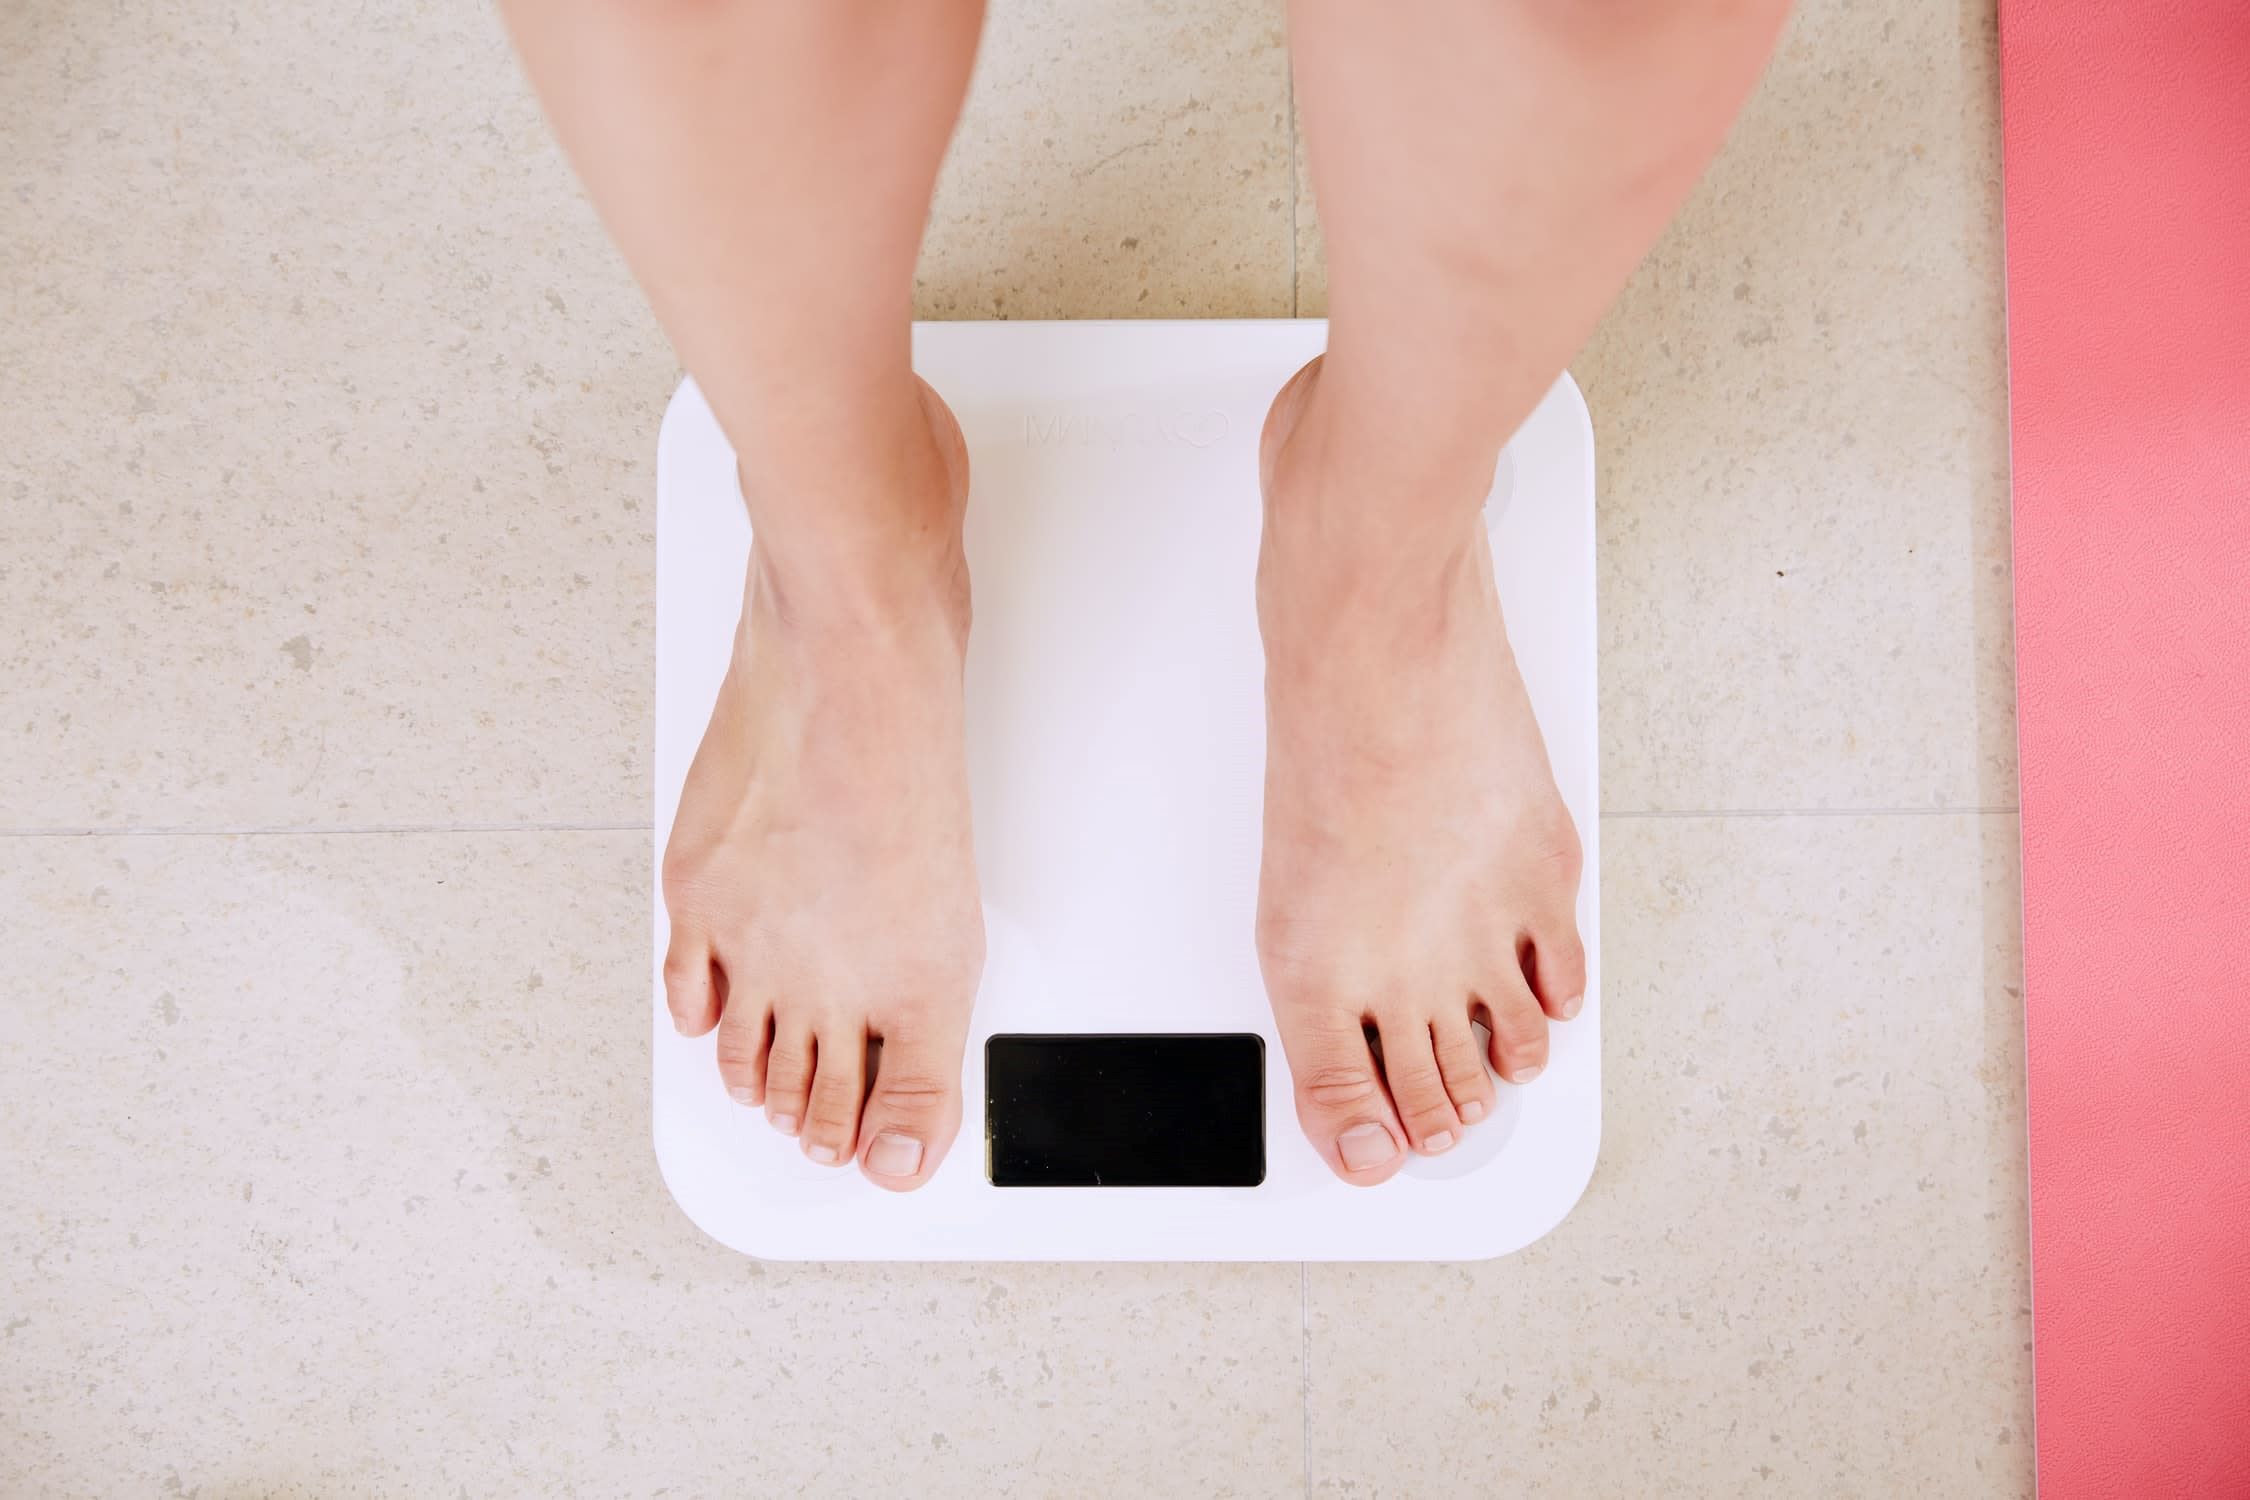 Shocking Truth: Is A 14-Year-Old Really Overweight At 5’11” And 200 Pounds?